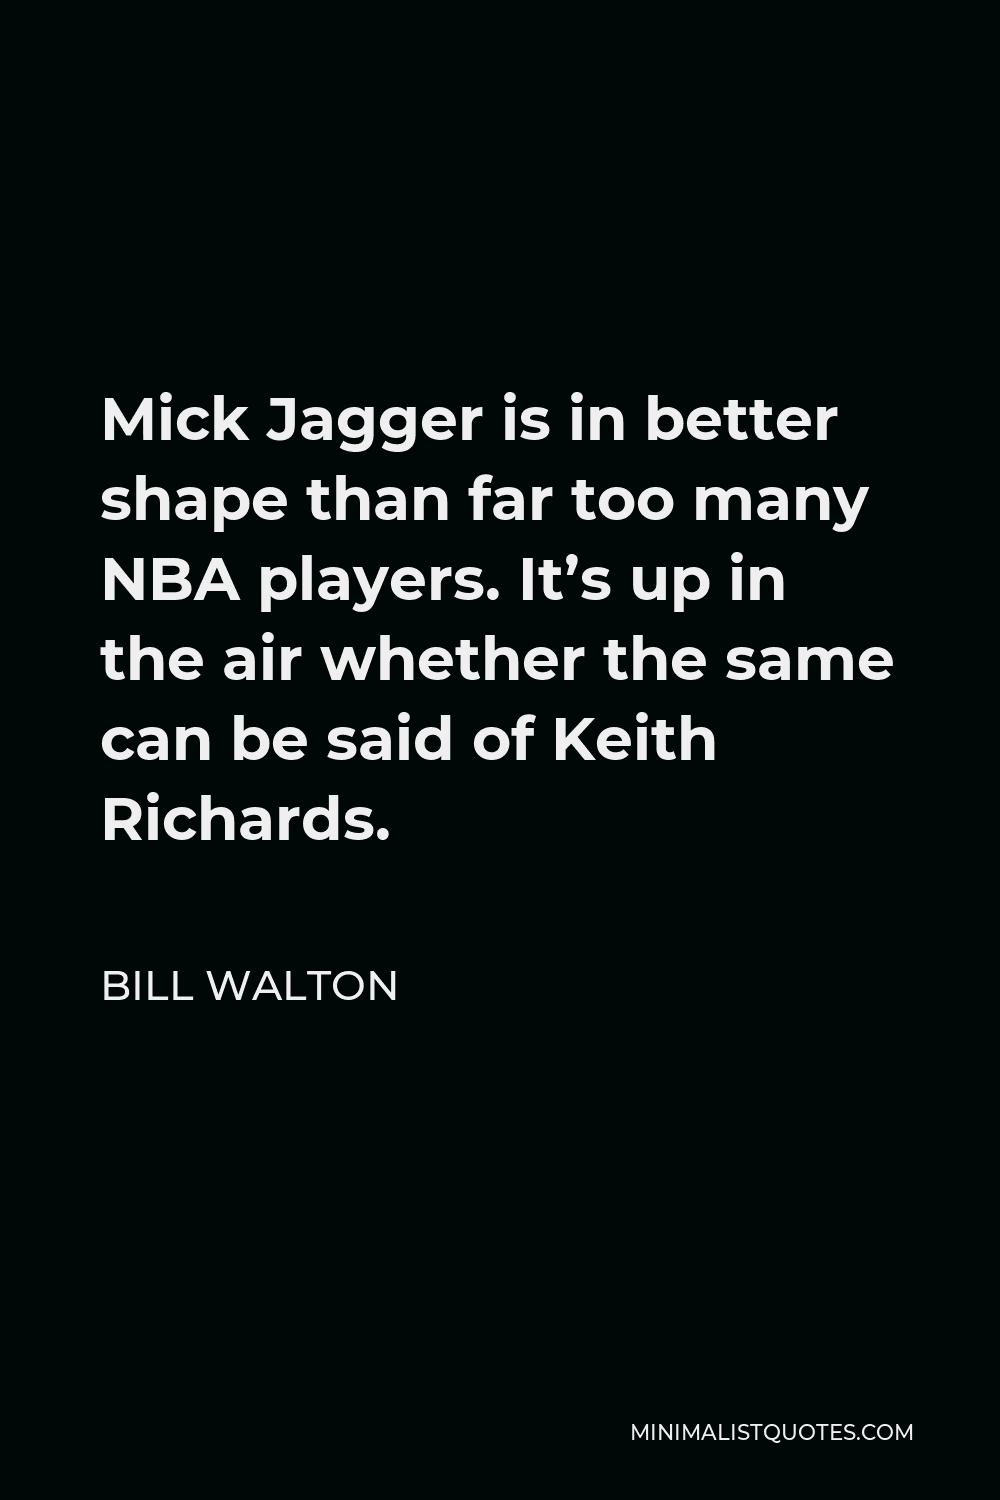 Bill Walton Quote - Mick Jagger is in better shape than far too many NBA players. It’s up in the air whether the same can be said of Keith Richards.